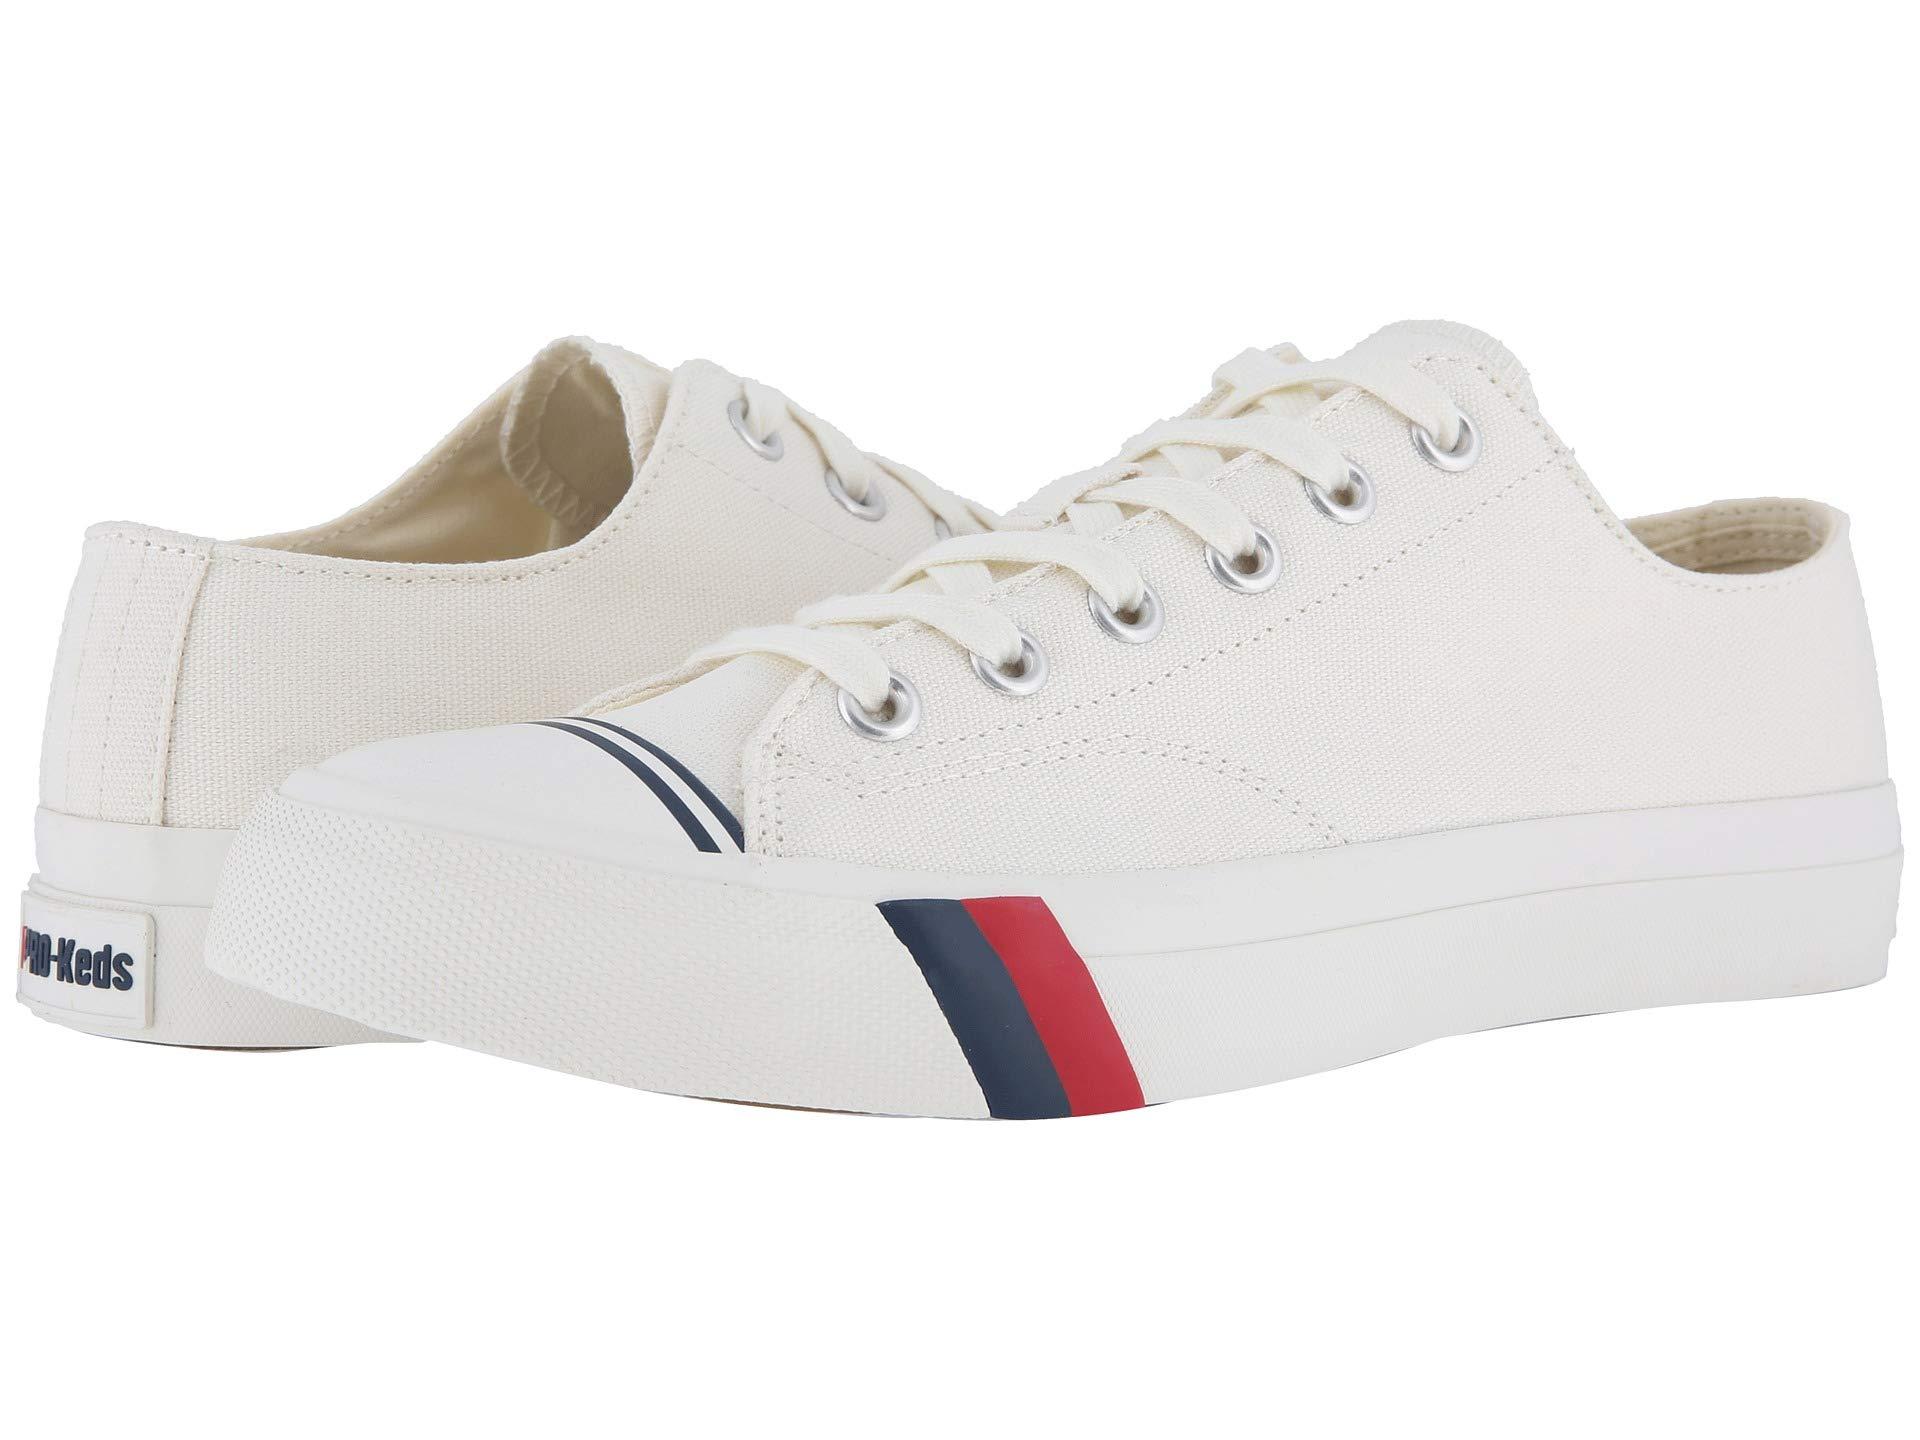 Siege hærge Swipe Pro Keds Royal Lo Lace Up in White | Lyst